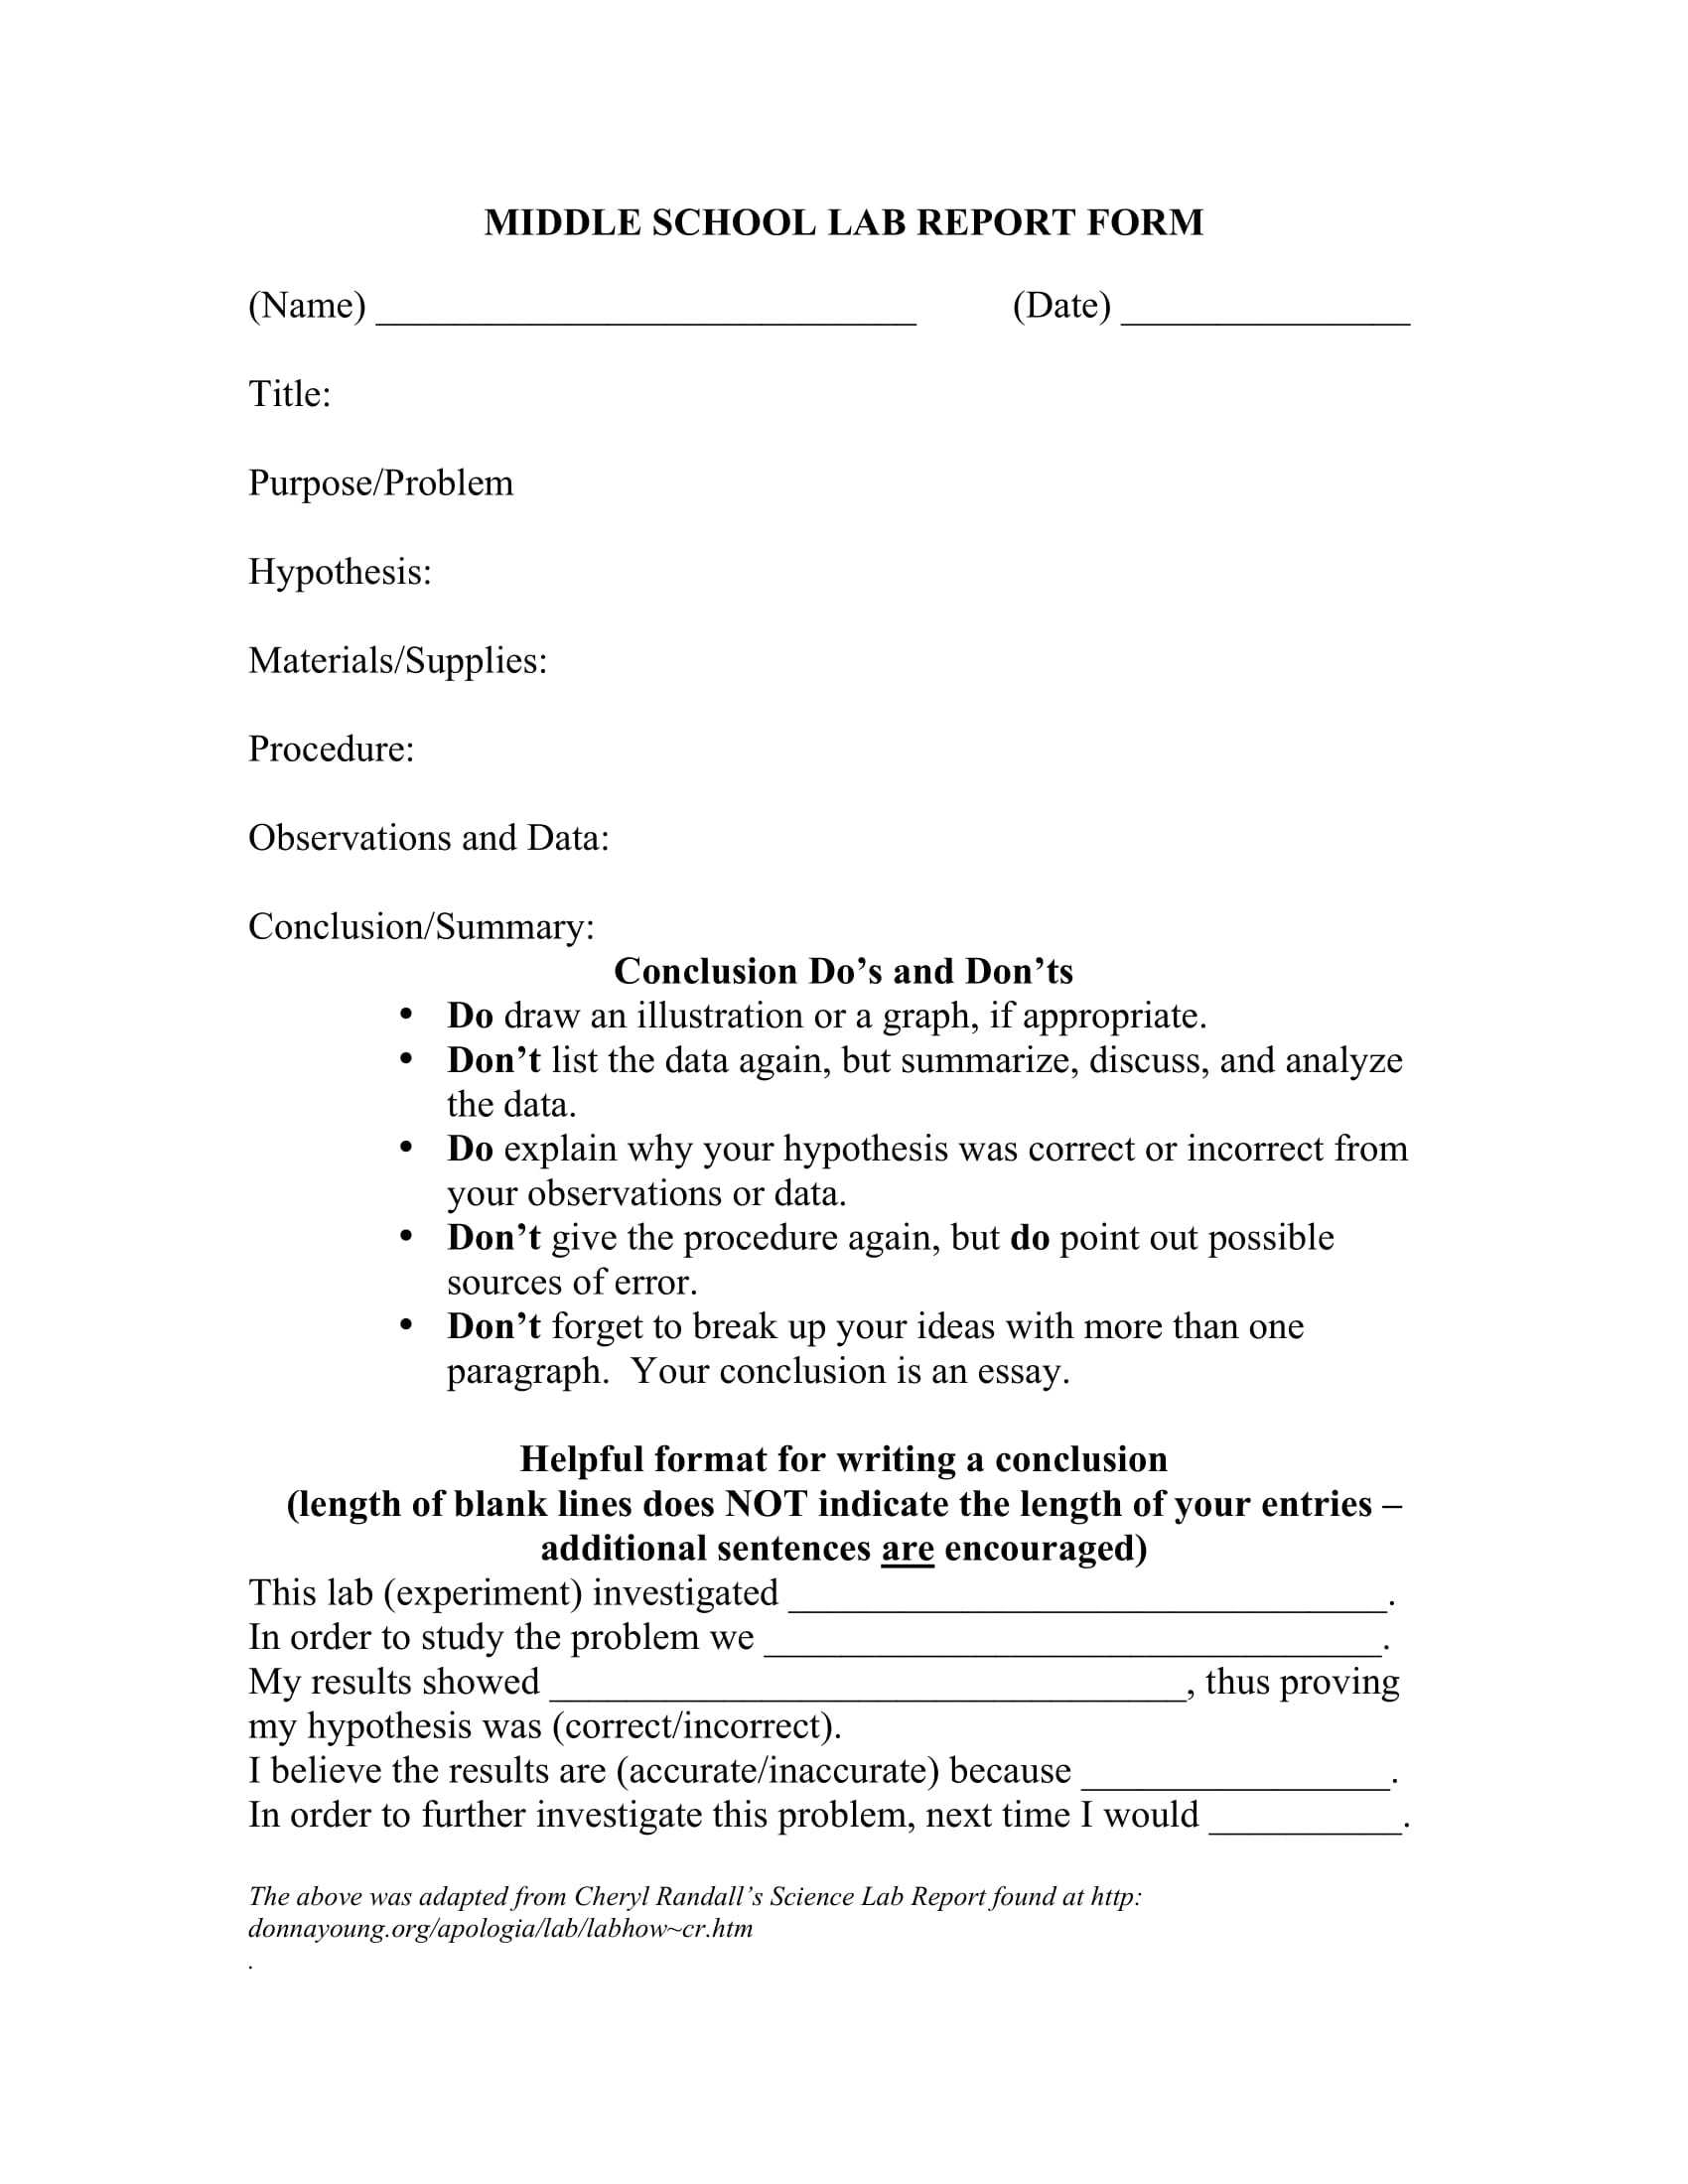 Free 11+ Laboratory Report Forms In Pdf | Doc For Lab Report Template Middle School